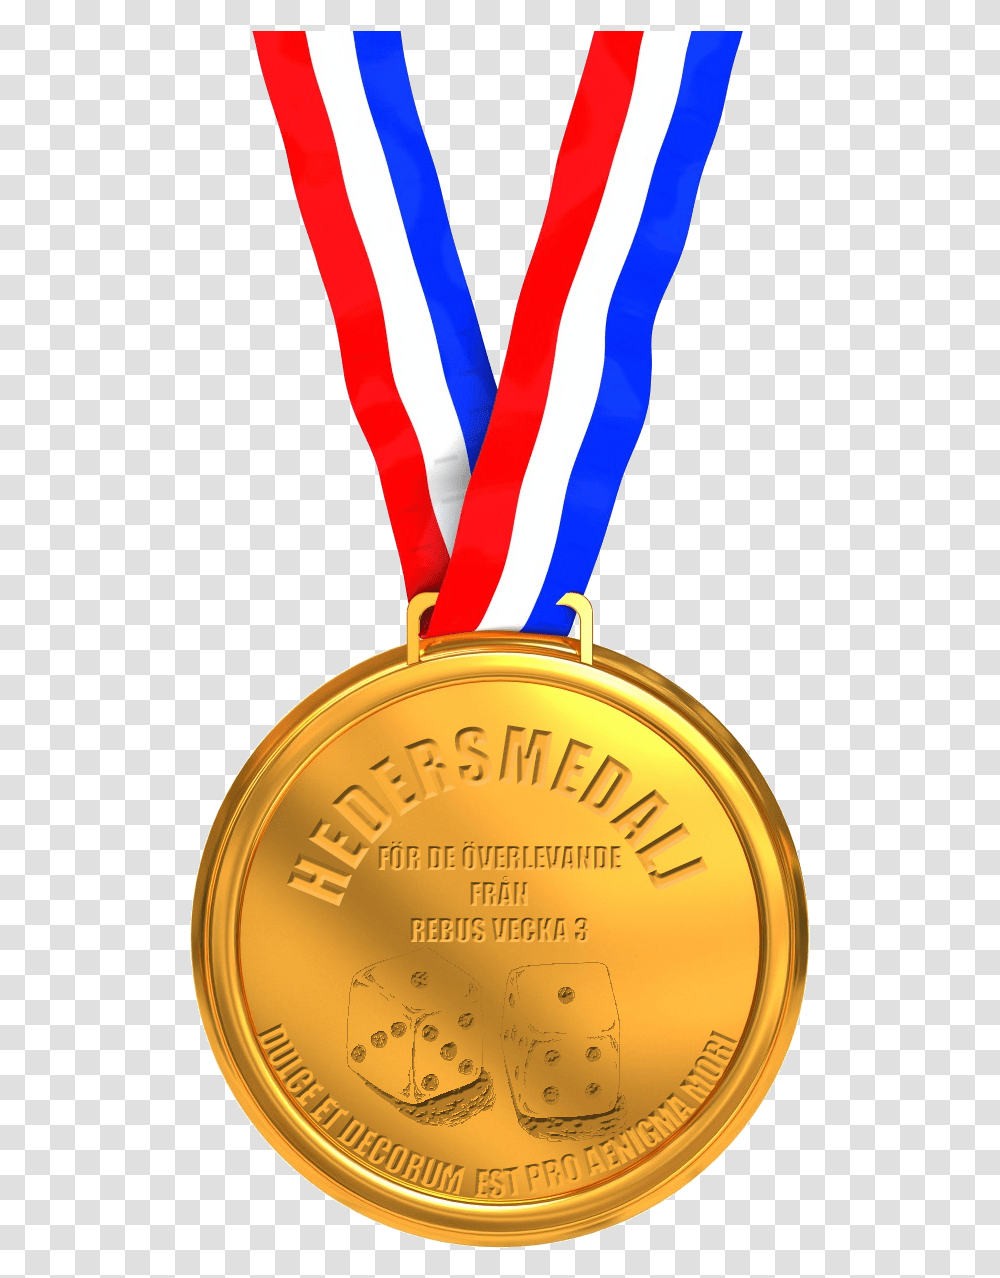 Gold Medal Image Gold Medal Background, Trophy, Wristwatch, Clock Tower, Architecture Transparent Png